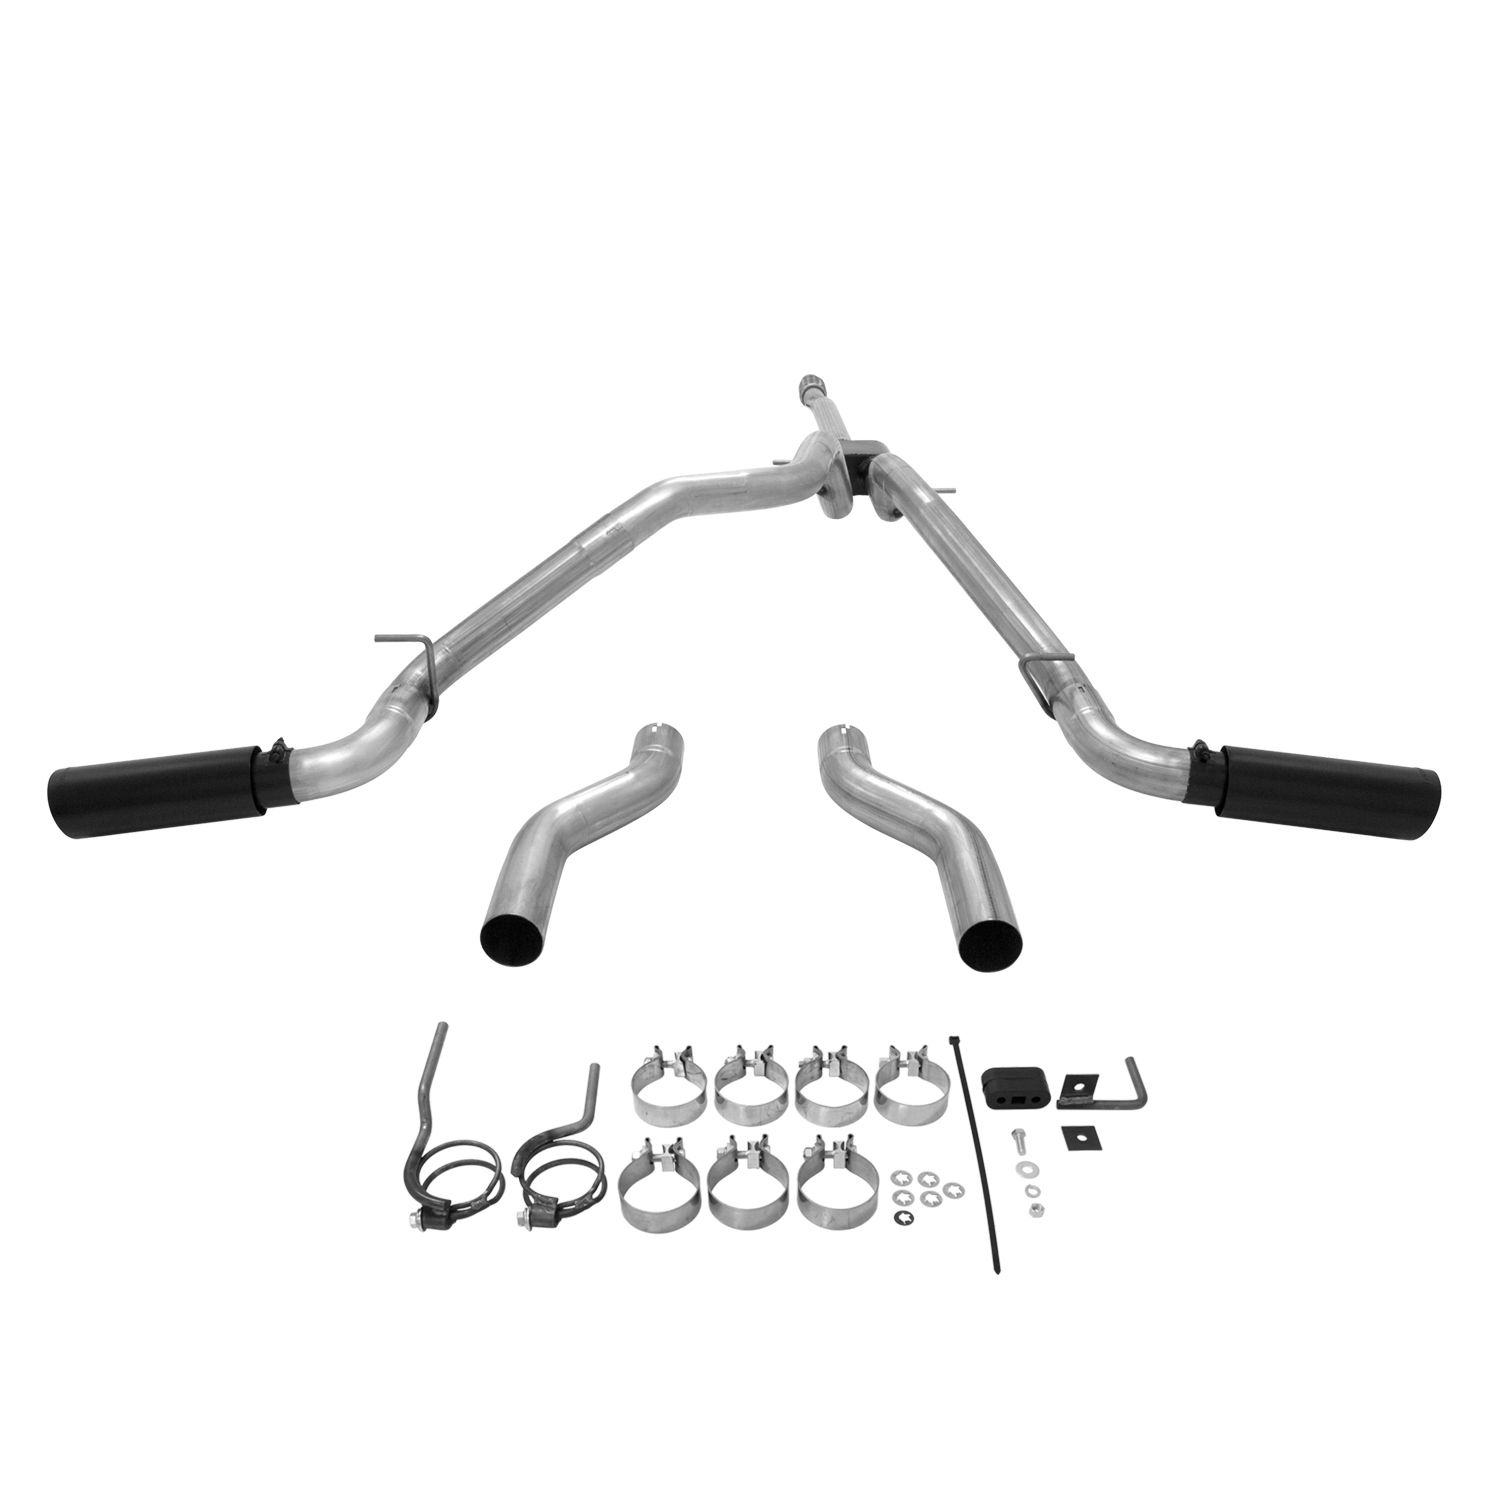 2009-2013 GMC Sierra 1500 5.3L 4DR Crew Cab/EXT Cab Flowmaster Outlaw Cat-Back Exhaust